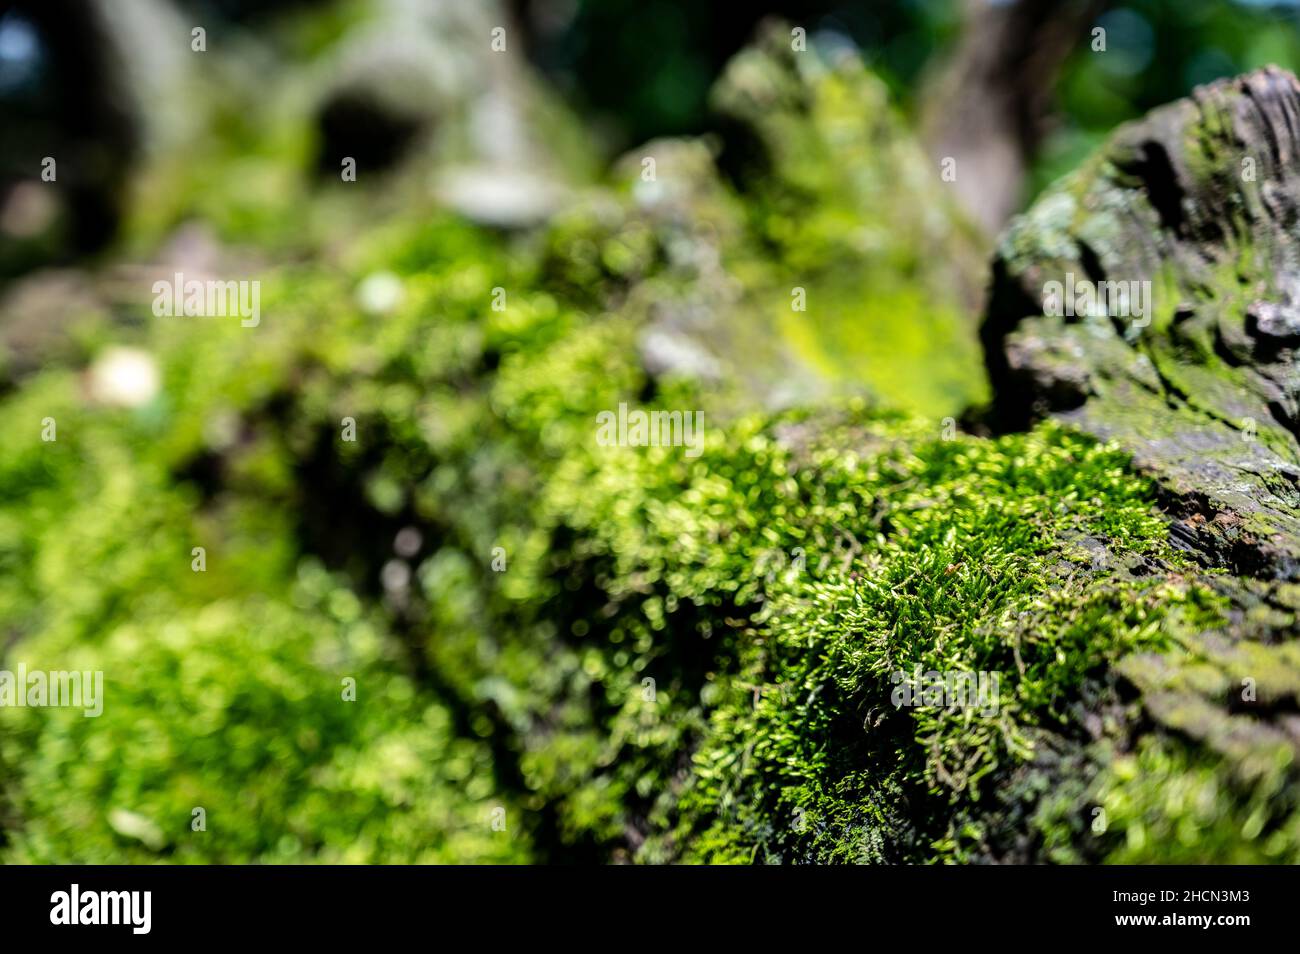 patch of moss showing both gametophytes and sporophytes with a blurred forest backdrop Stock Photo